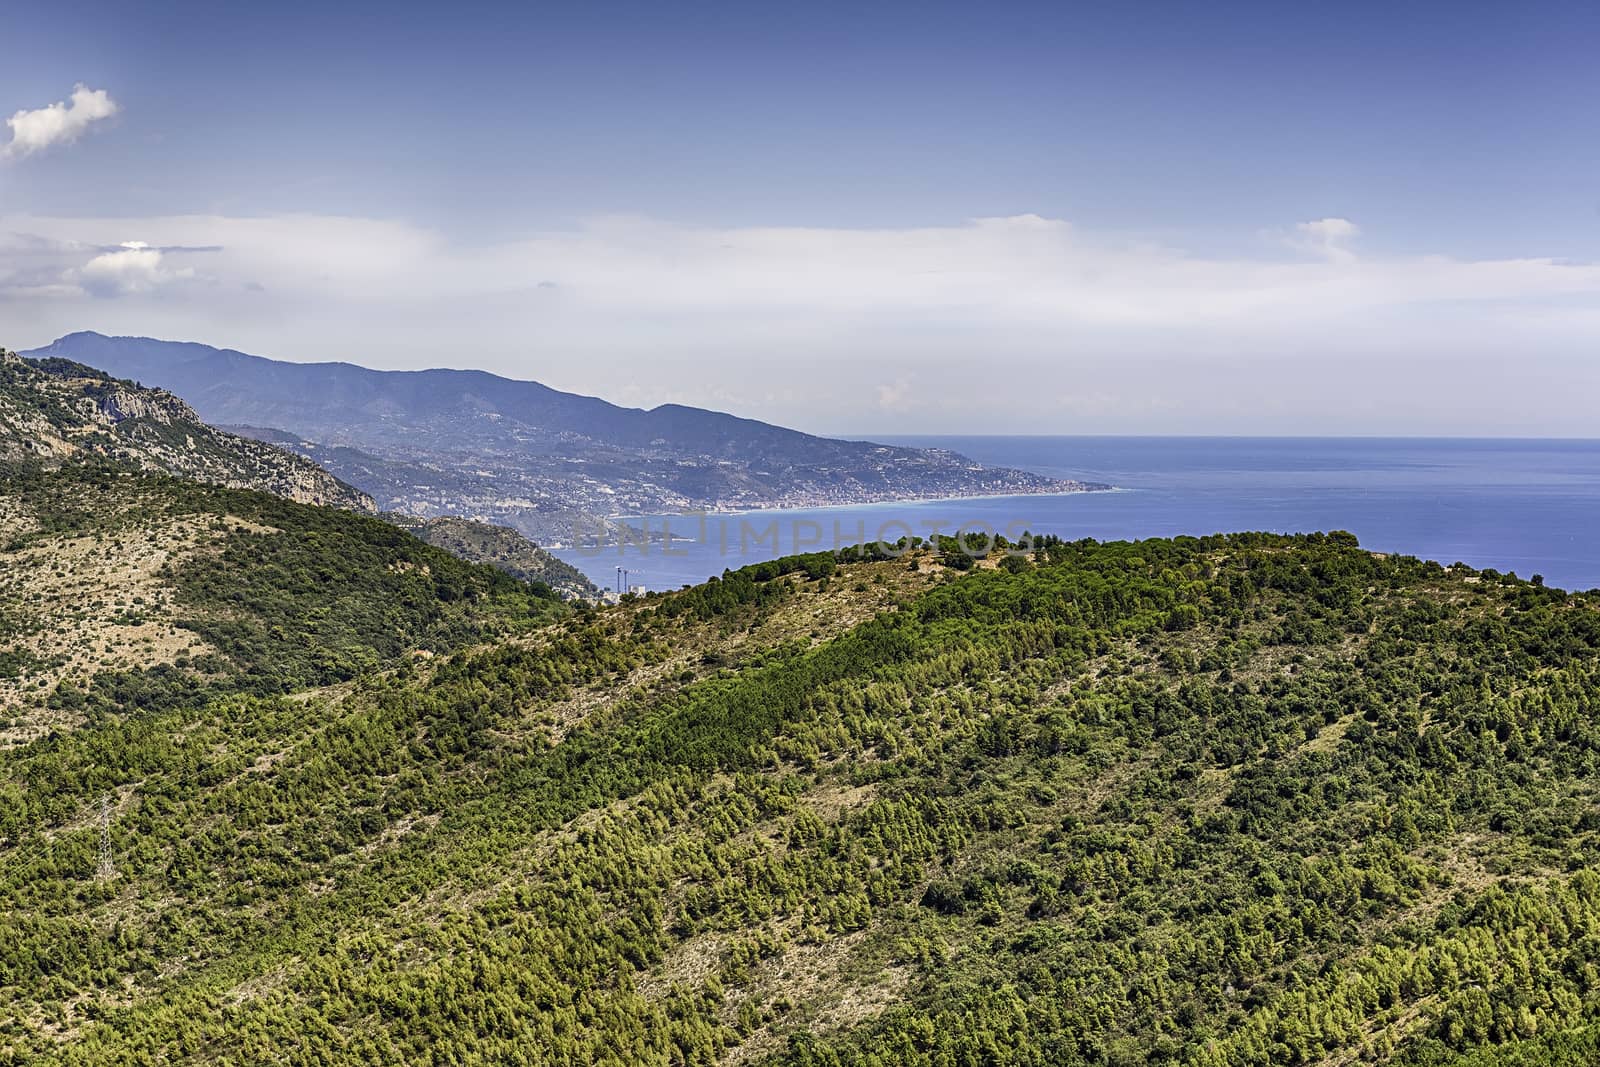 Scenic view over the coastline of the French Riviera near the town of Eze, iconic village near the city of Nice, Cote d'Azur, France